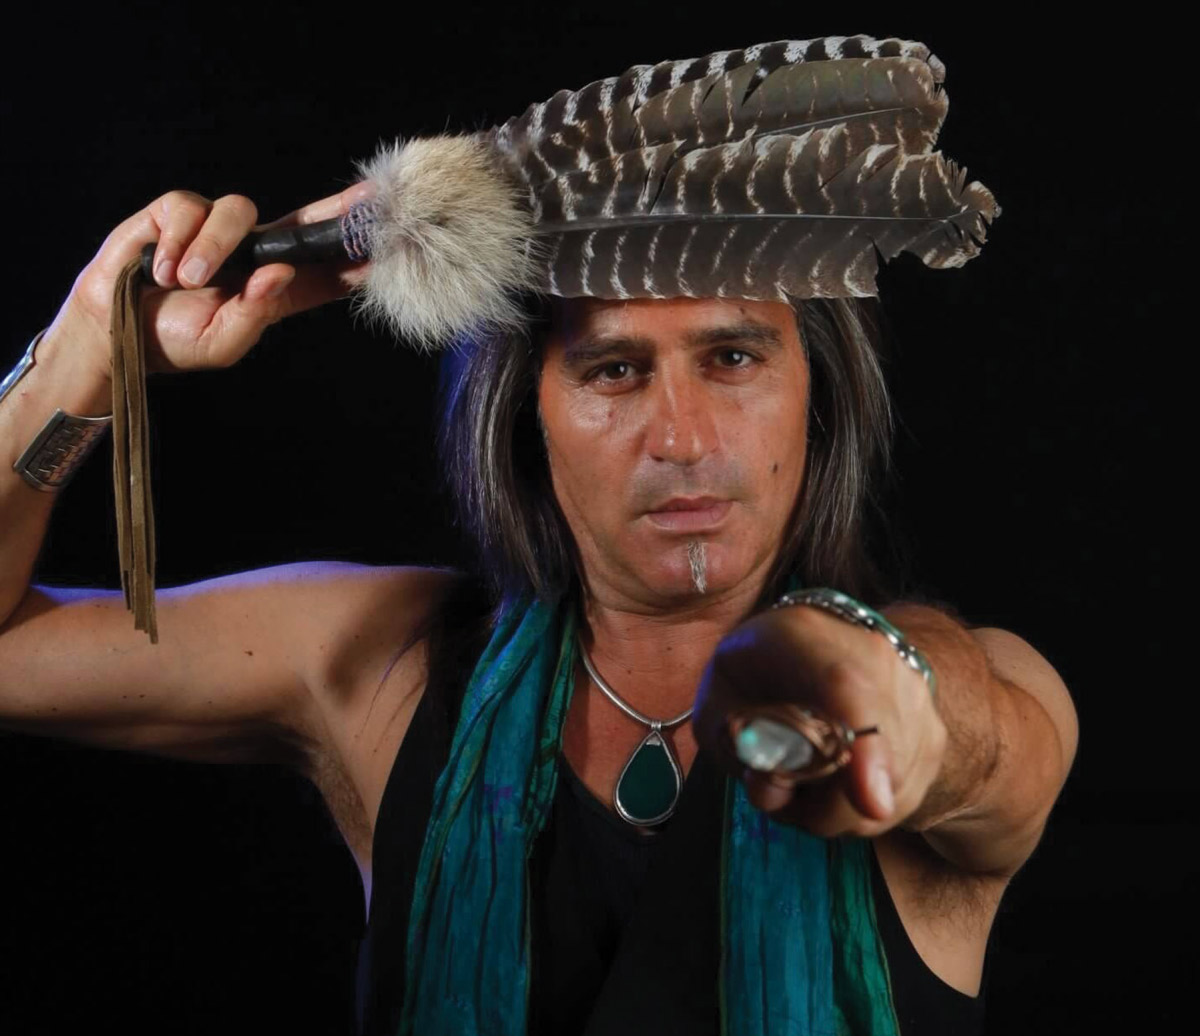 A photograph of a man posing in costume Native American apparrel and accessories. 